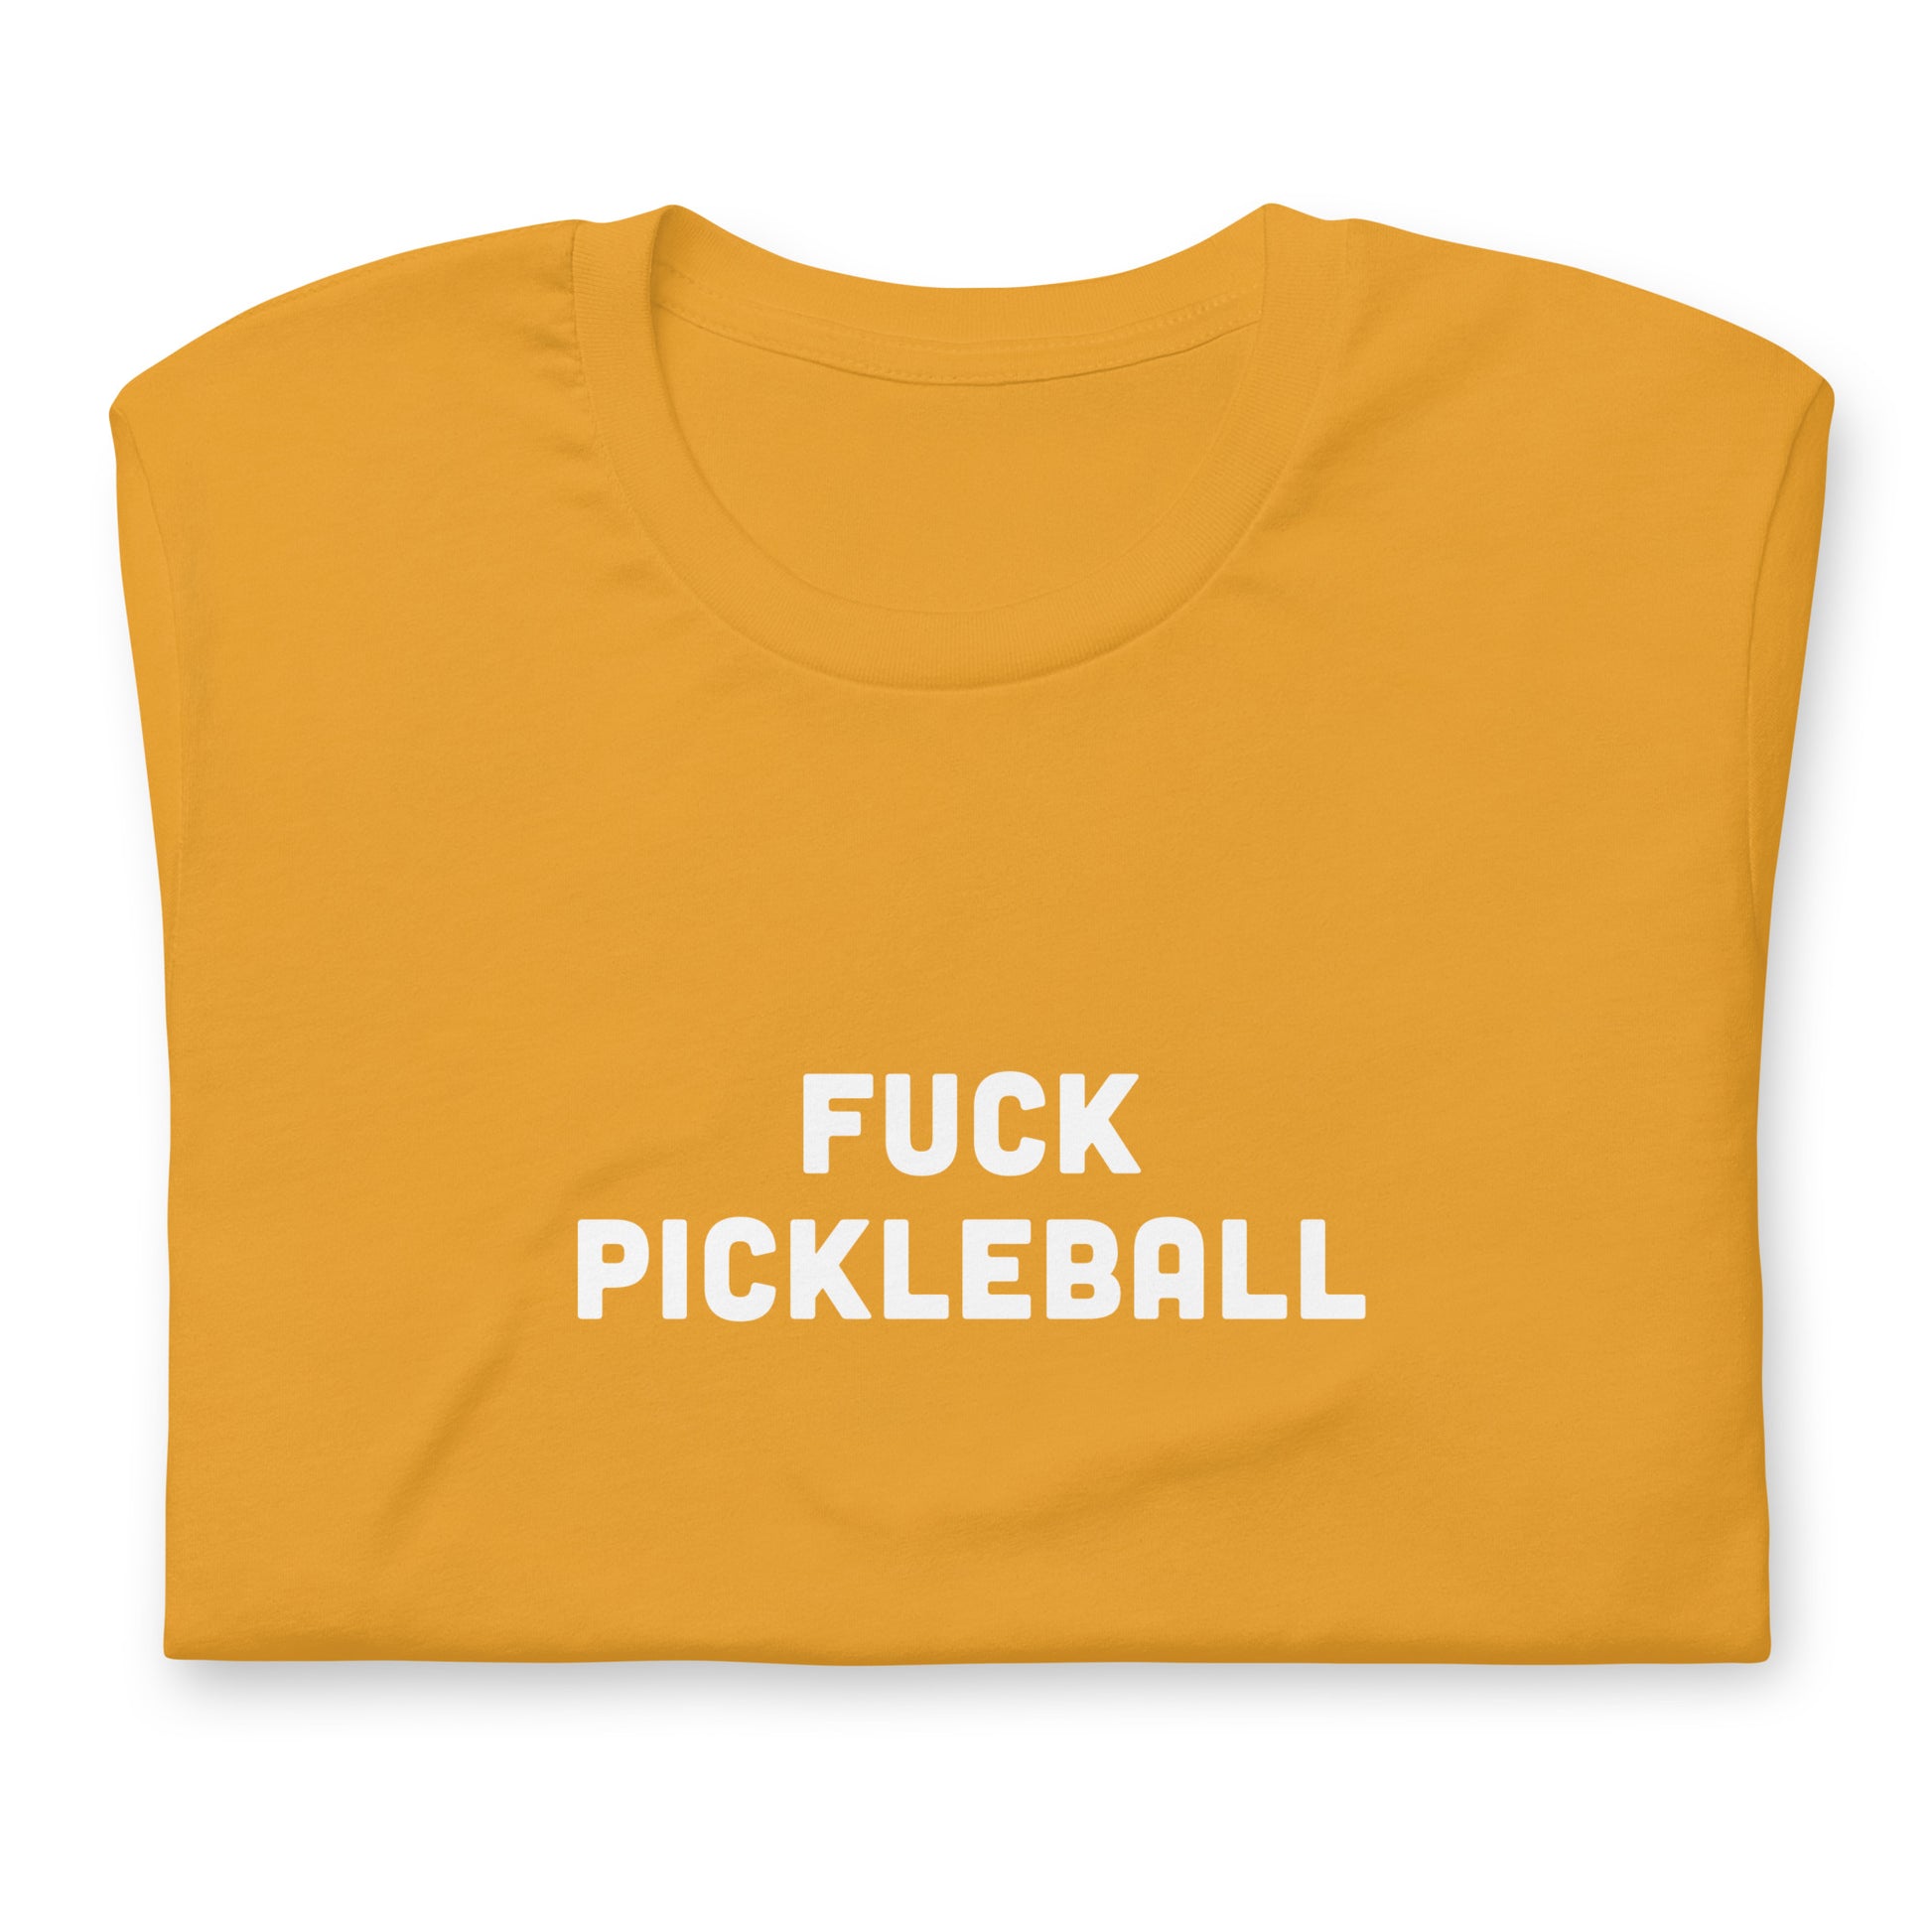 Fuck Pickleball T-Shirt Size M Color Forest